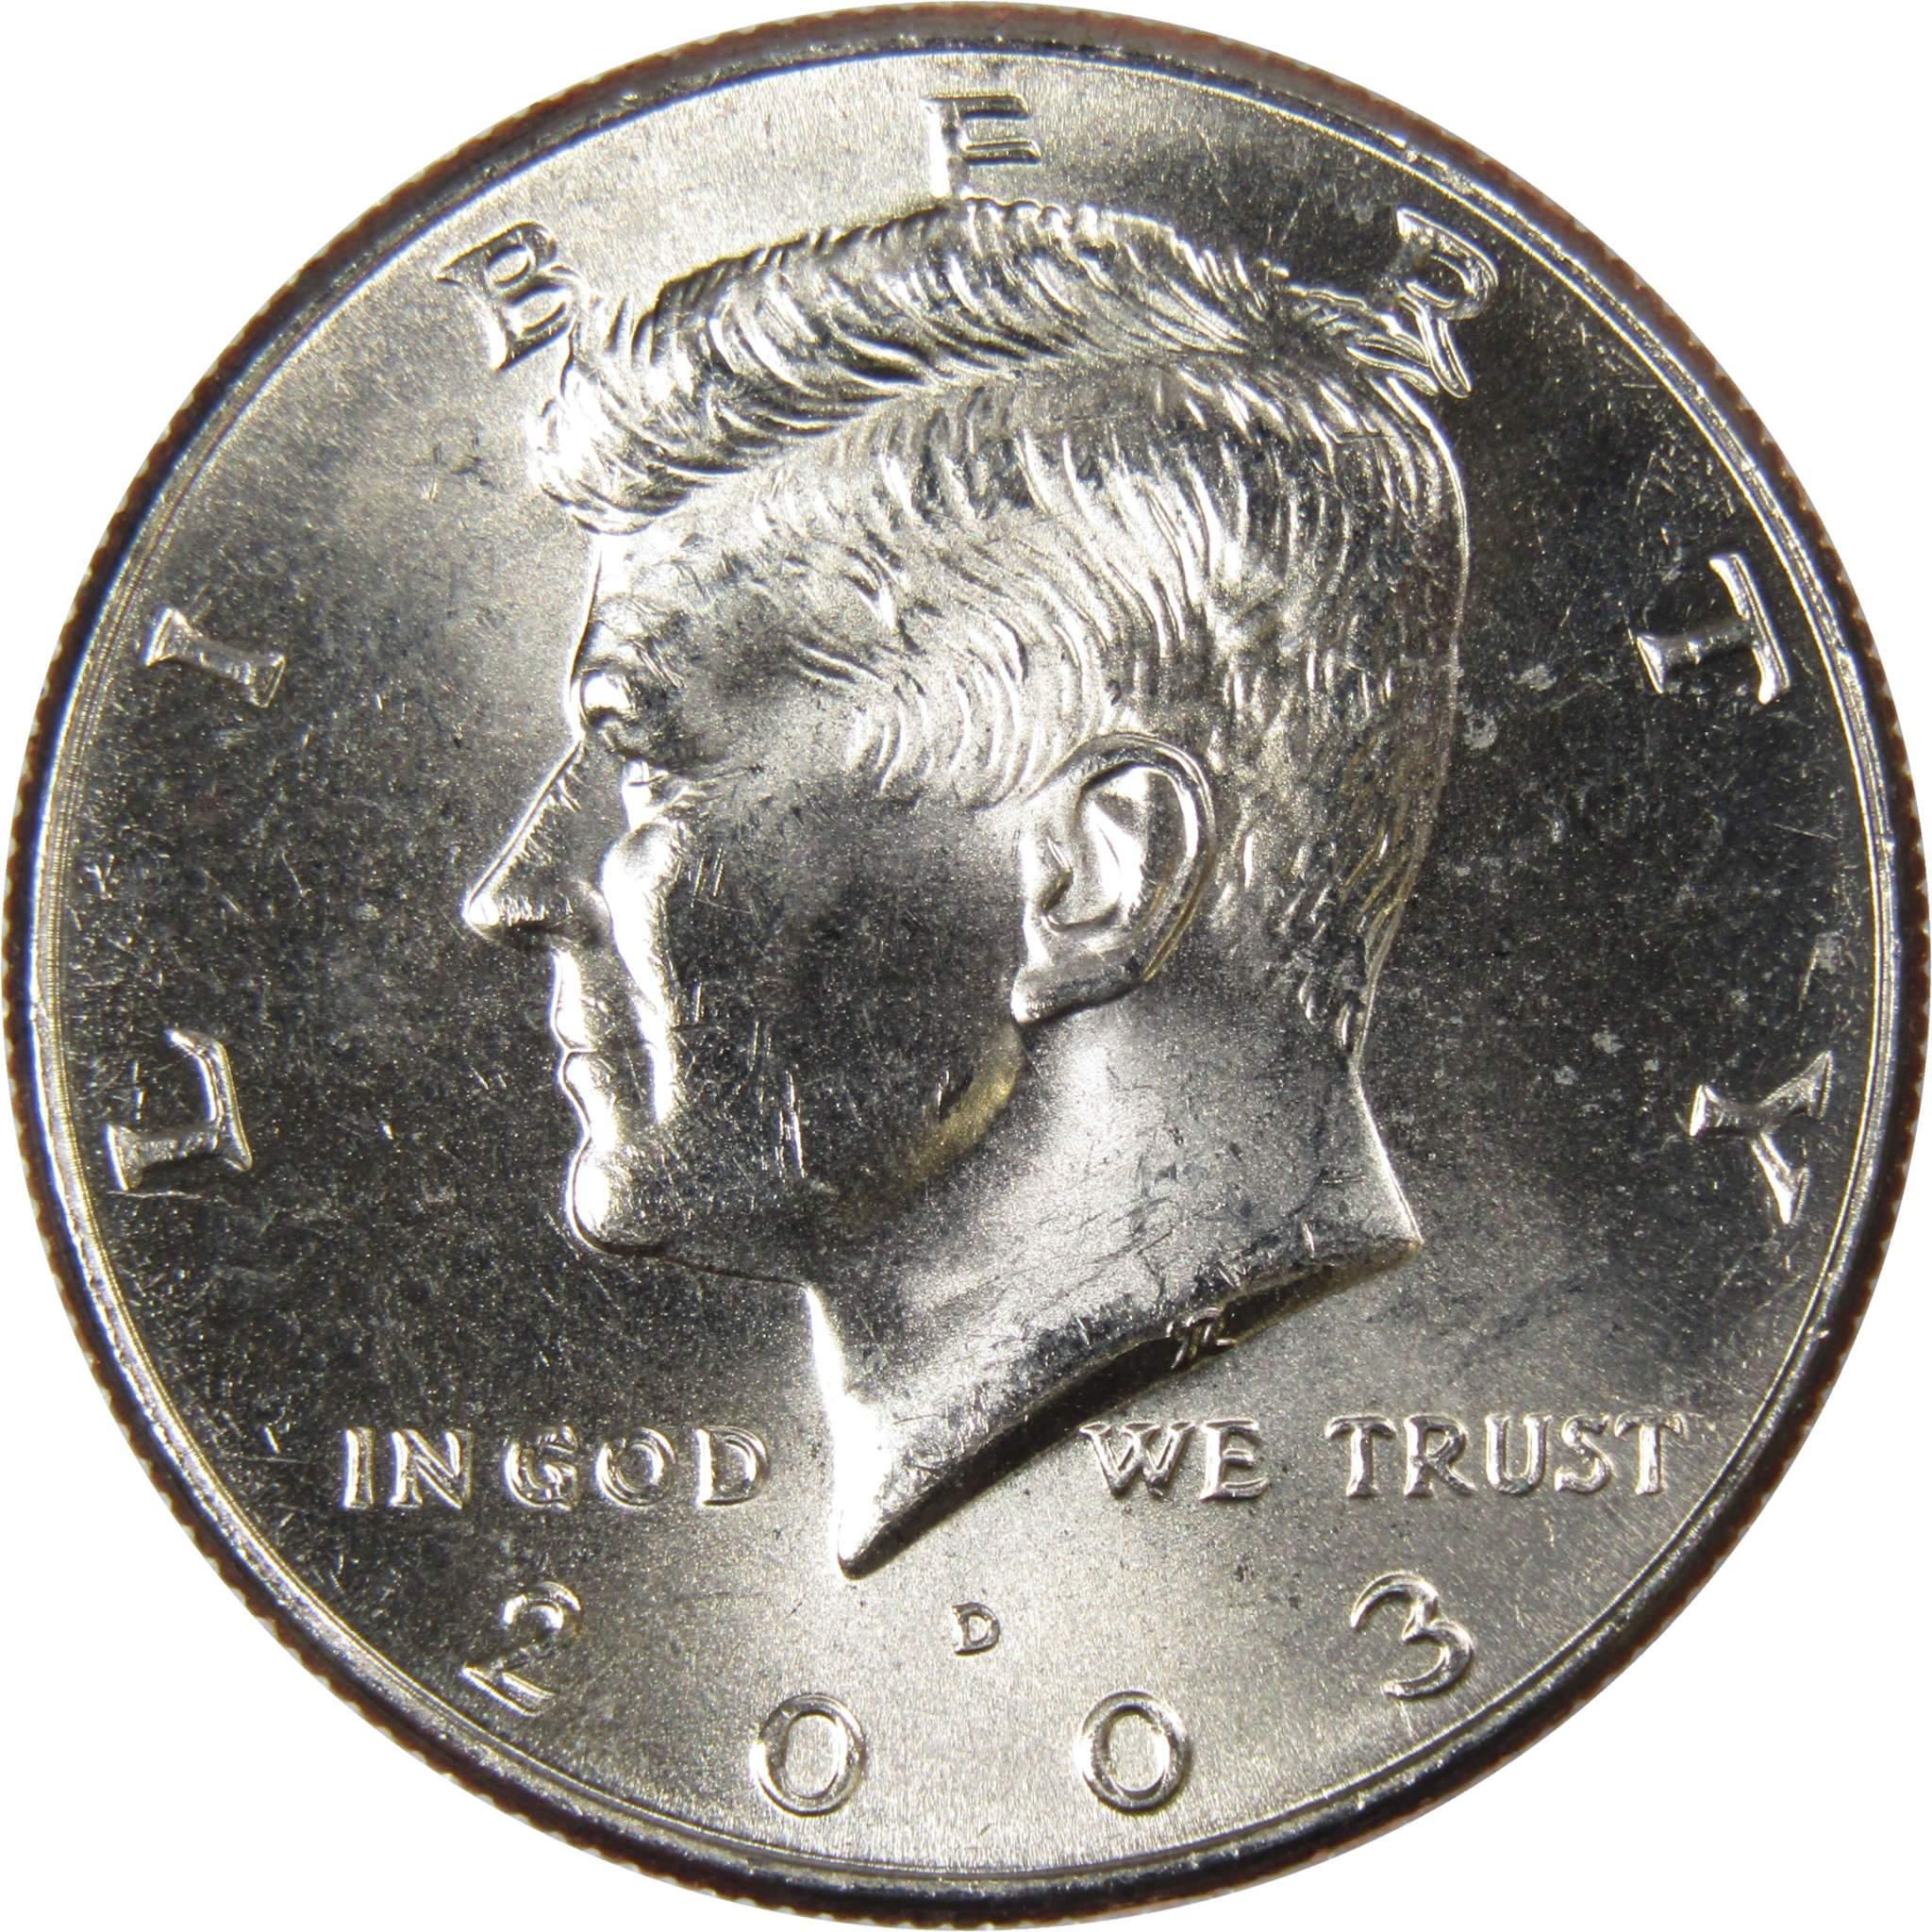 2003 D Kennedy Half Dollar BU Uncirculated Mint State 50c US Coin Collectible